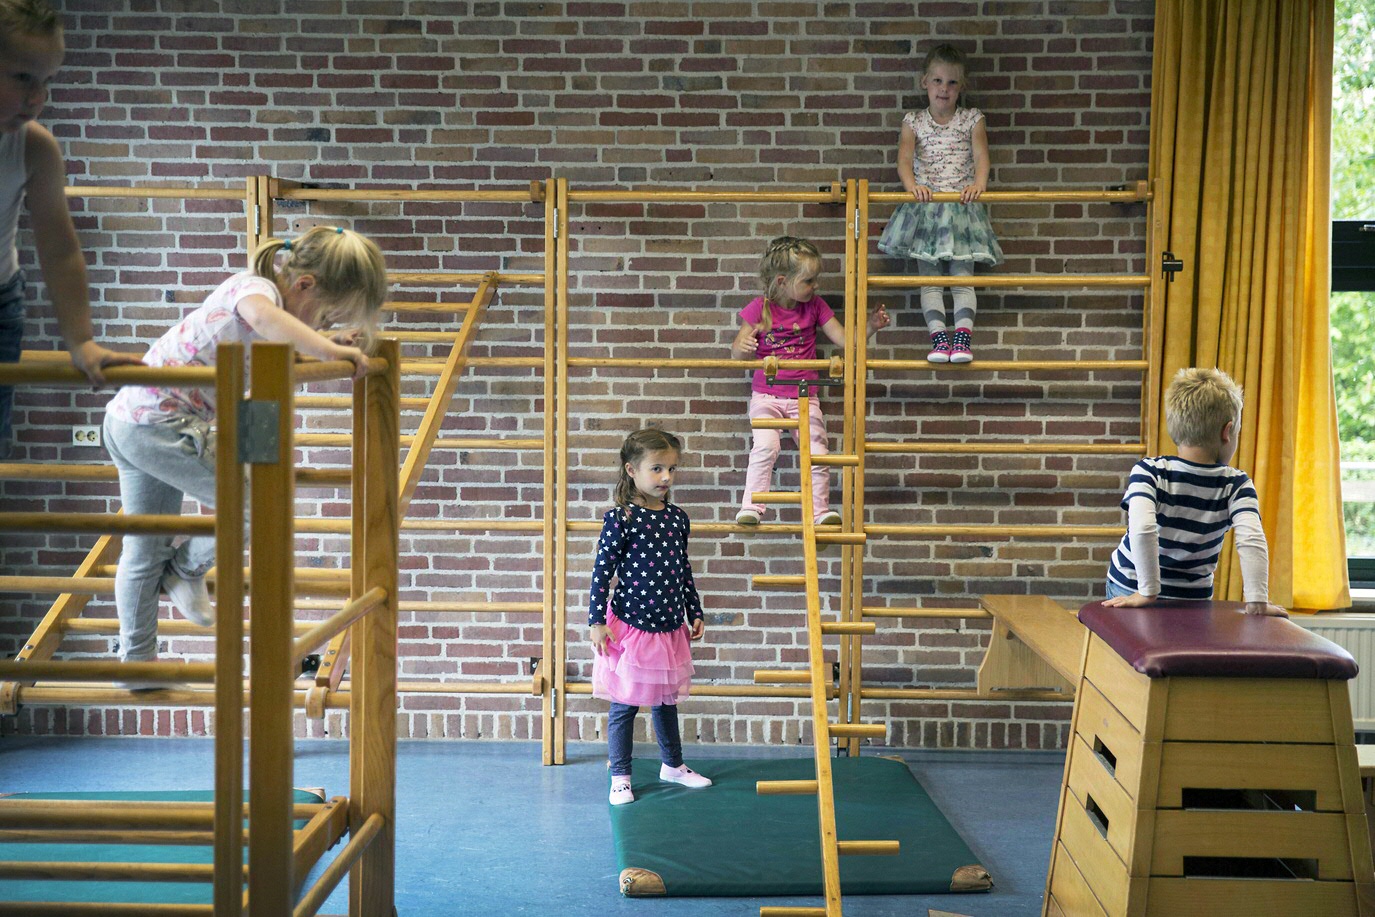 ‘When children arrive at school, they should think: this is fantastic.’ Photo: Werry Crone/Hollandse Hoogte